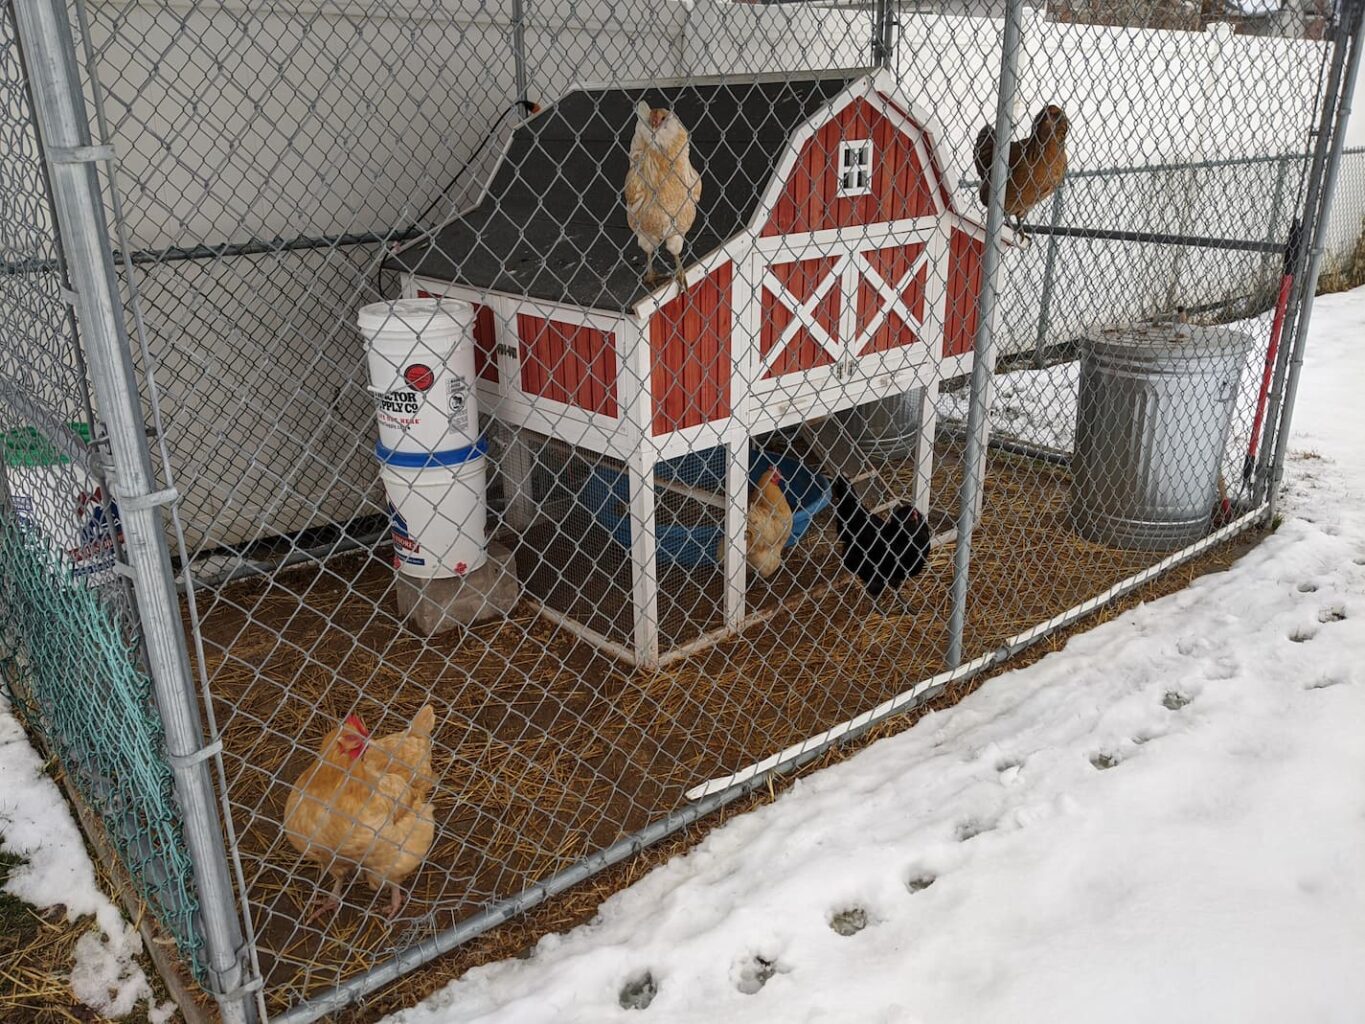 An image of chickens staying dry in the coop during winter.